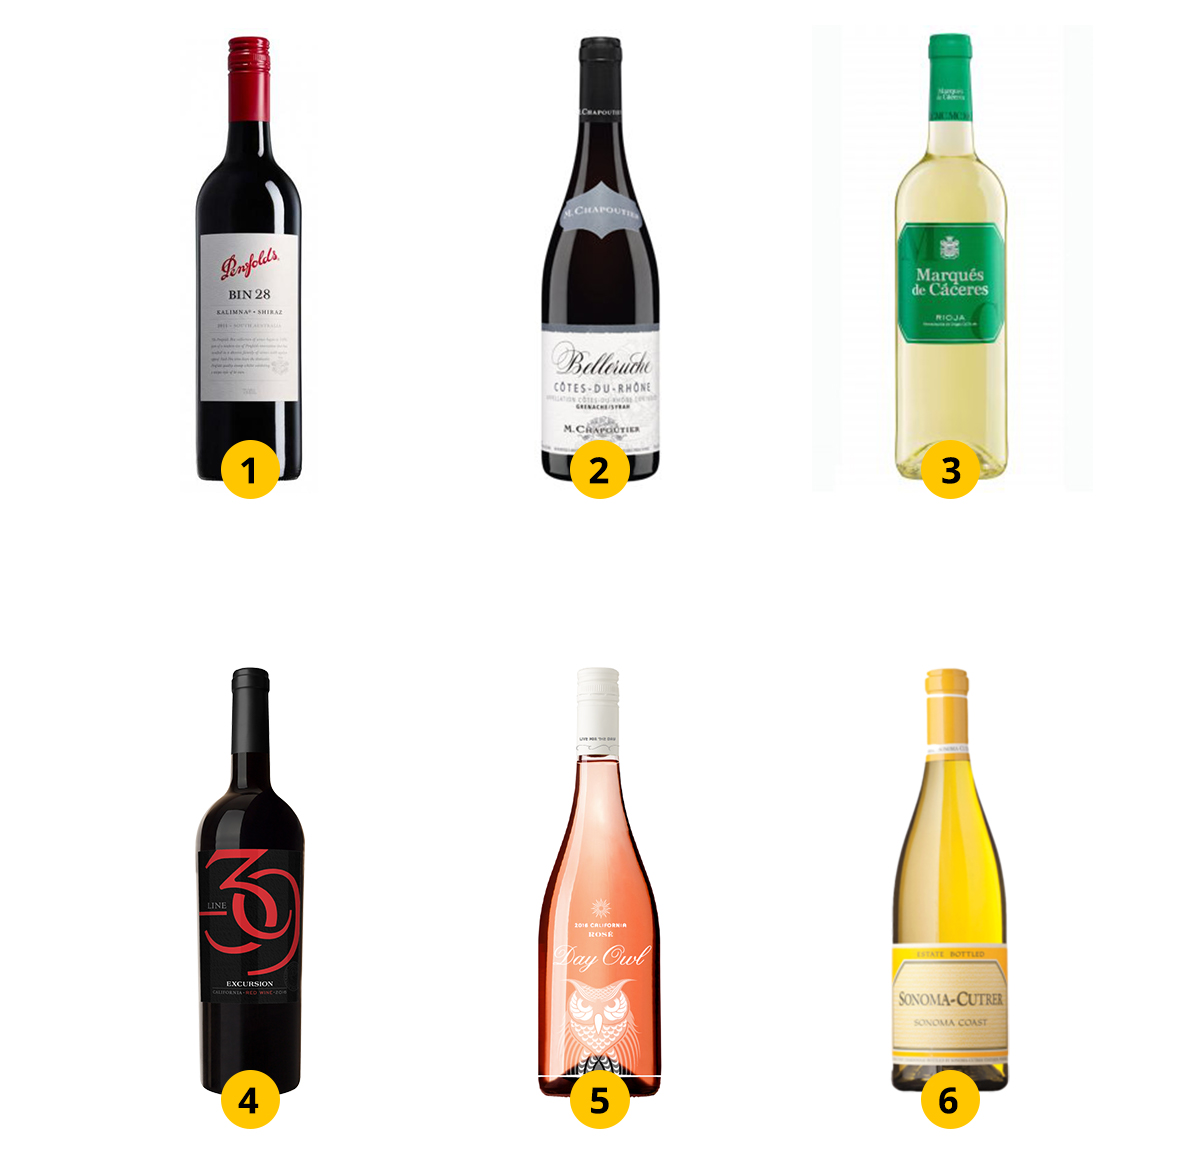 Top wines for grilling in your market.